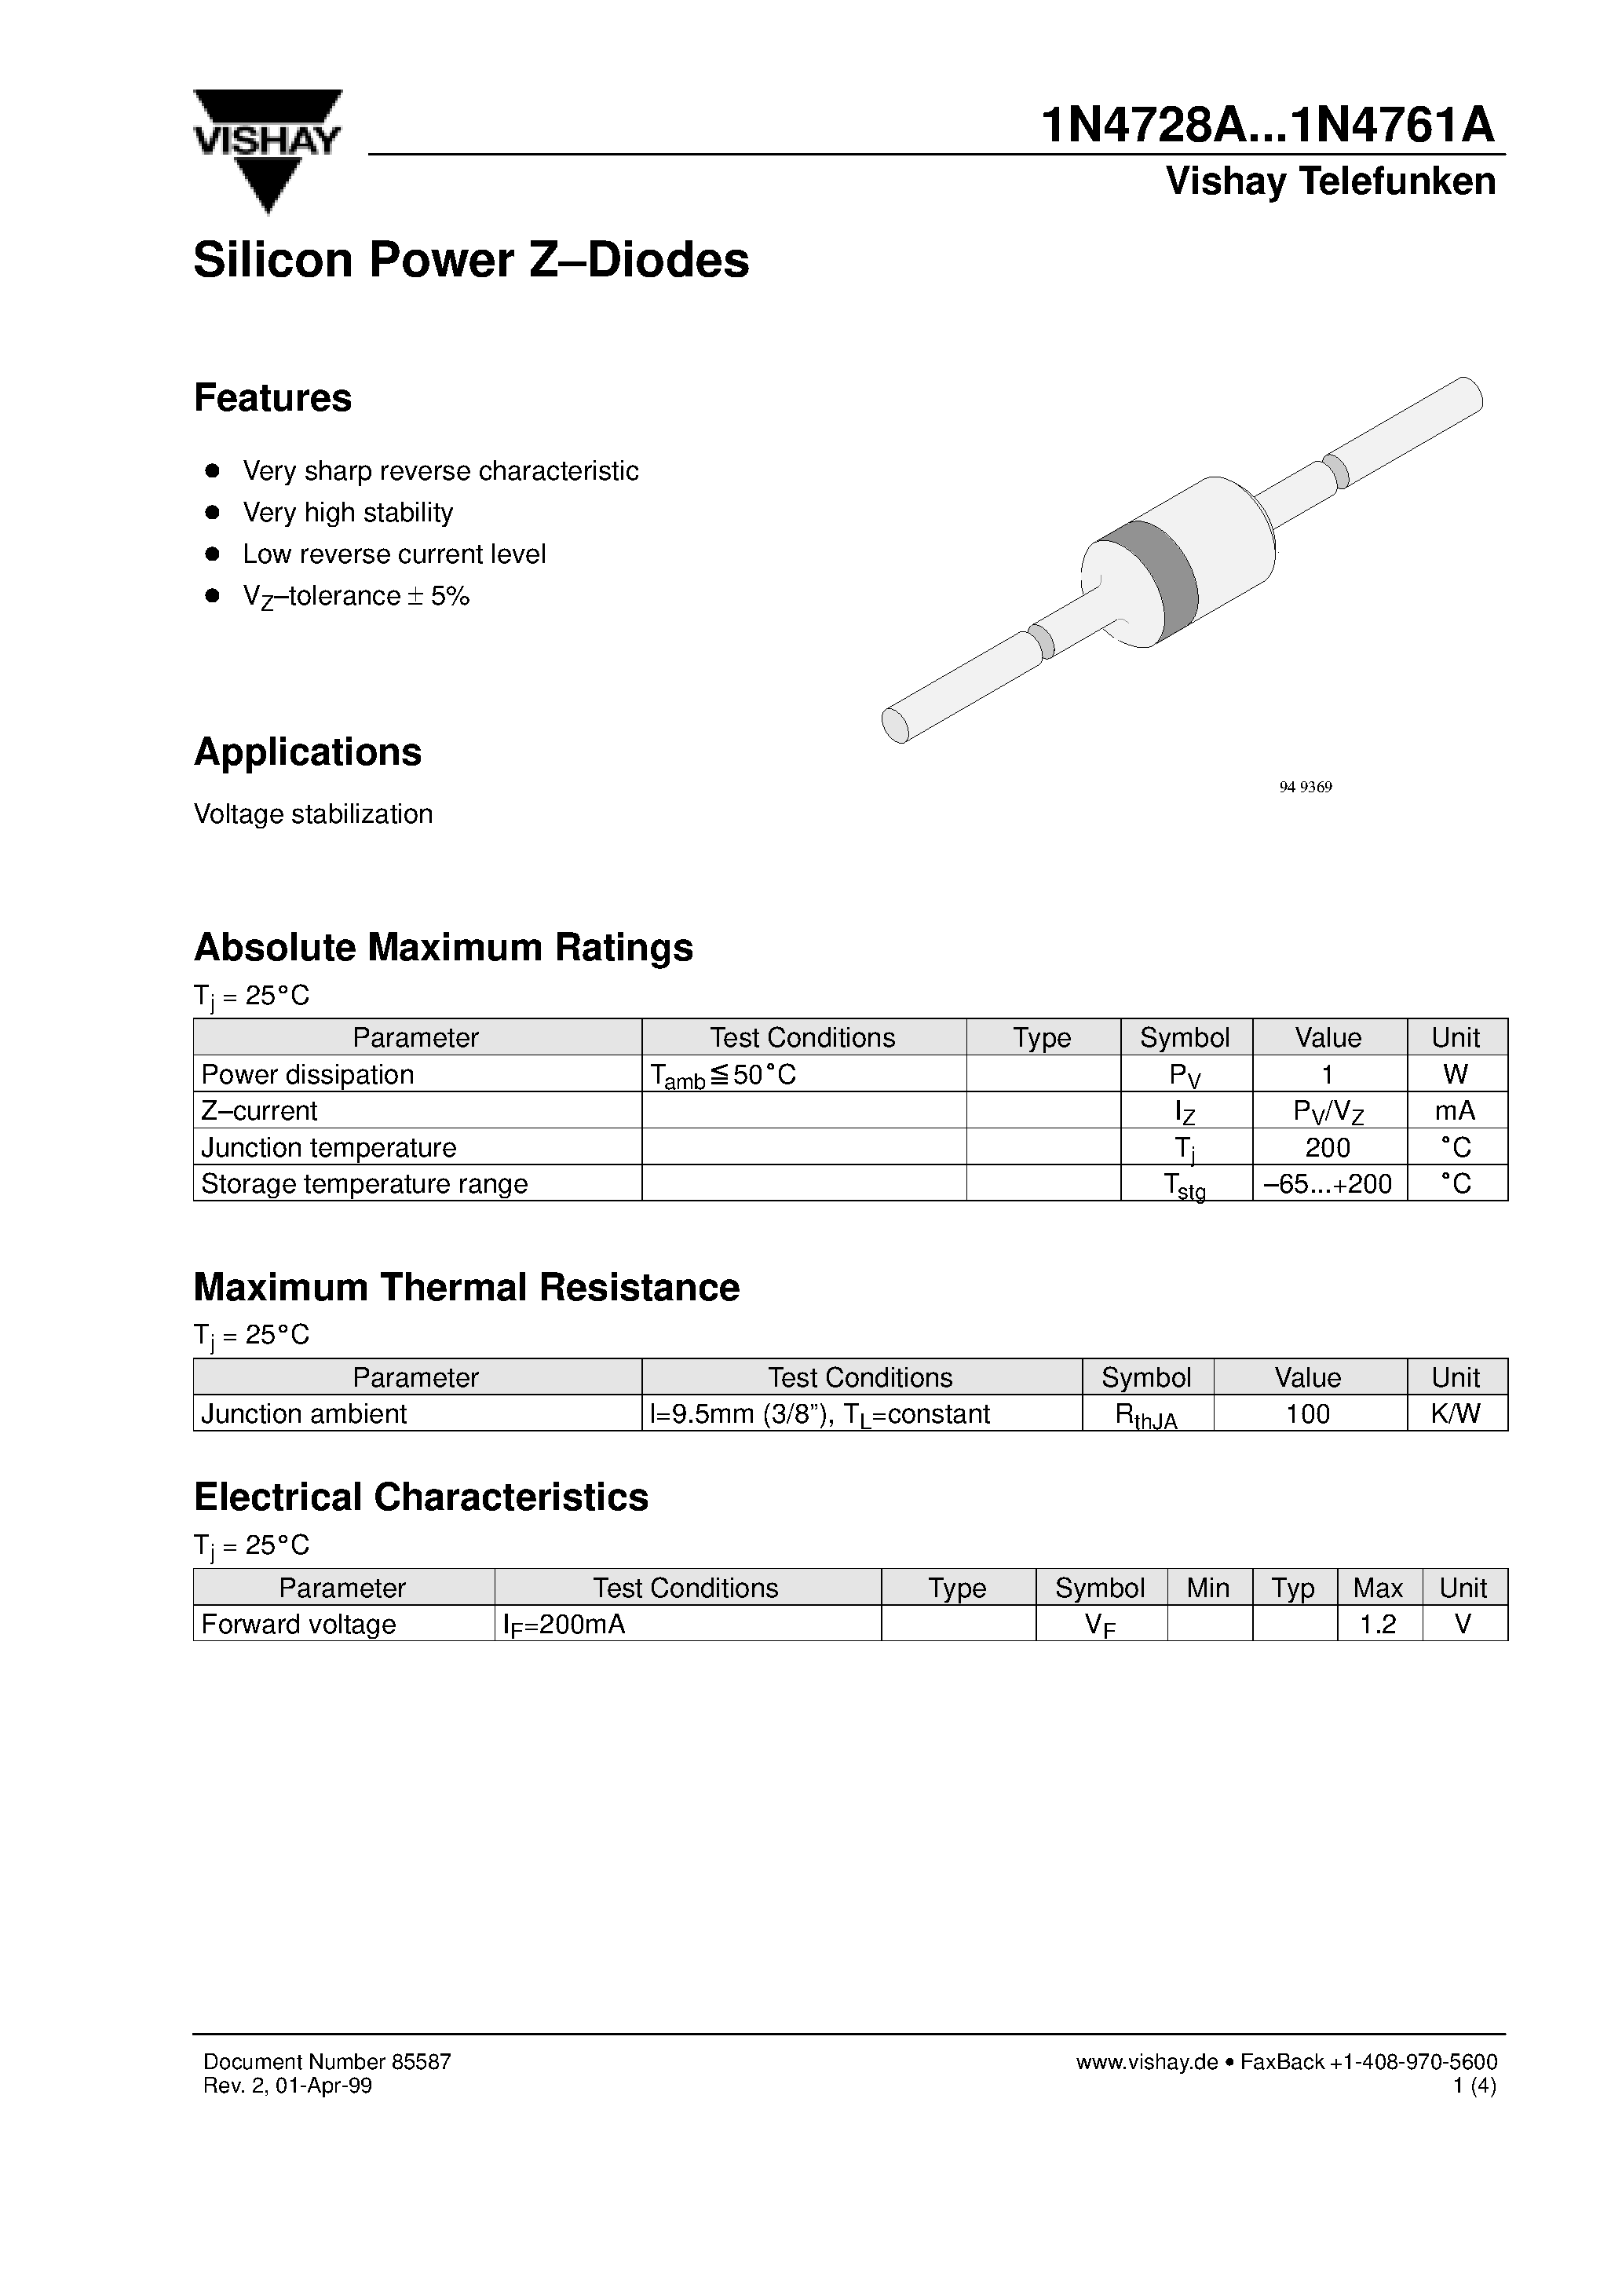 Datasheet 1N4741A - Silicon Power Z-Diodes page 1